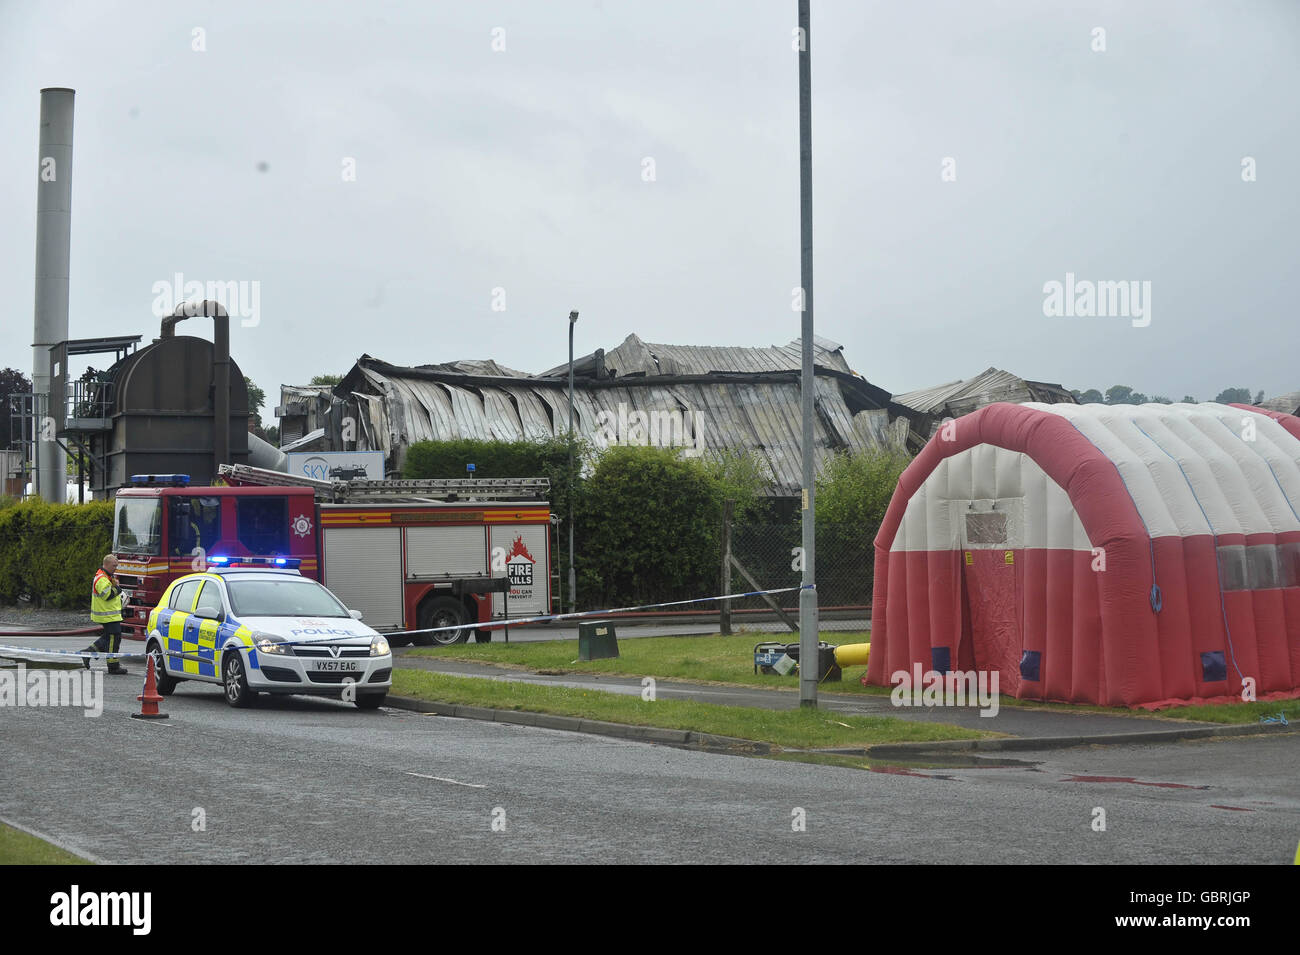 A general view of emergency services at the scene of a fire at an industrial site on Glendower Road, Hereford. Stock Photo